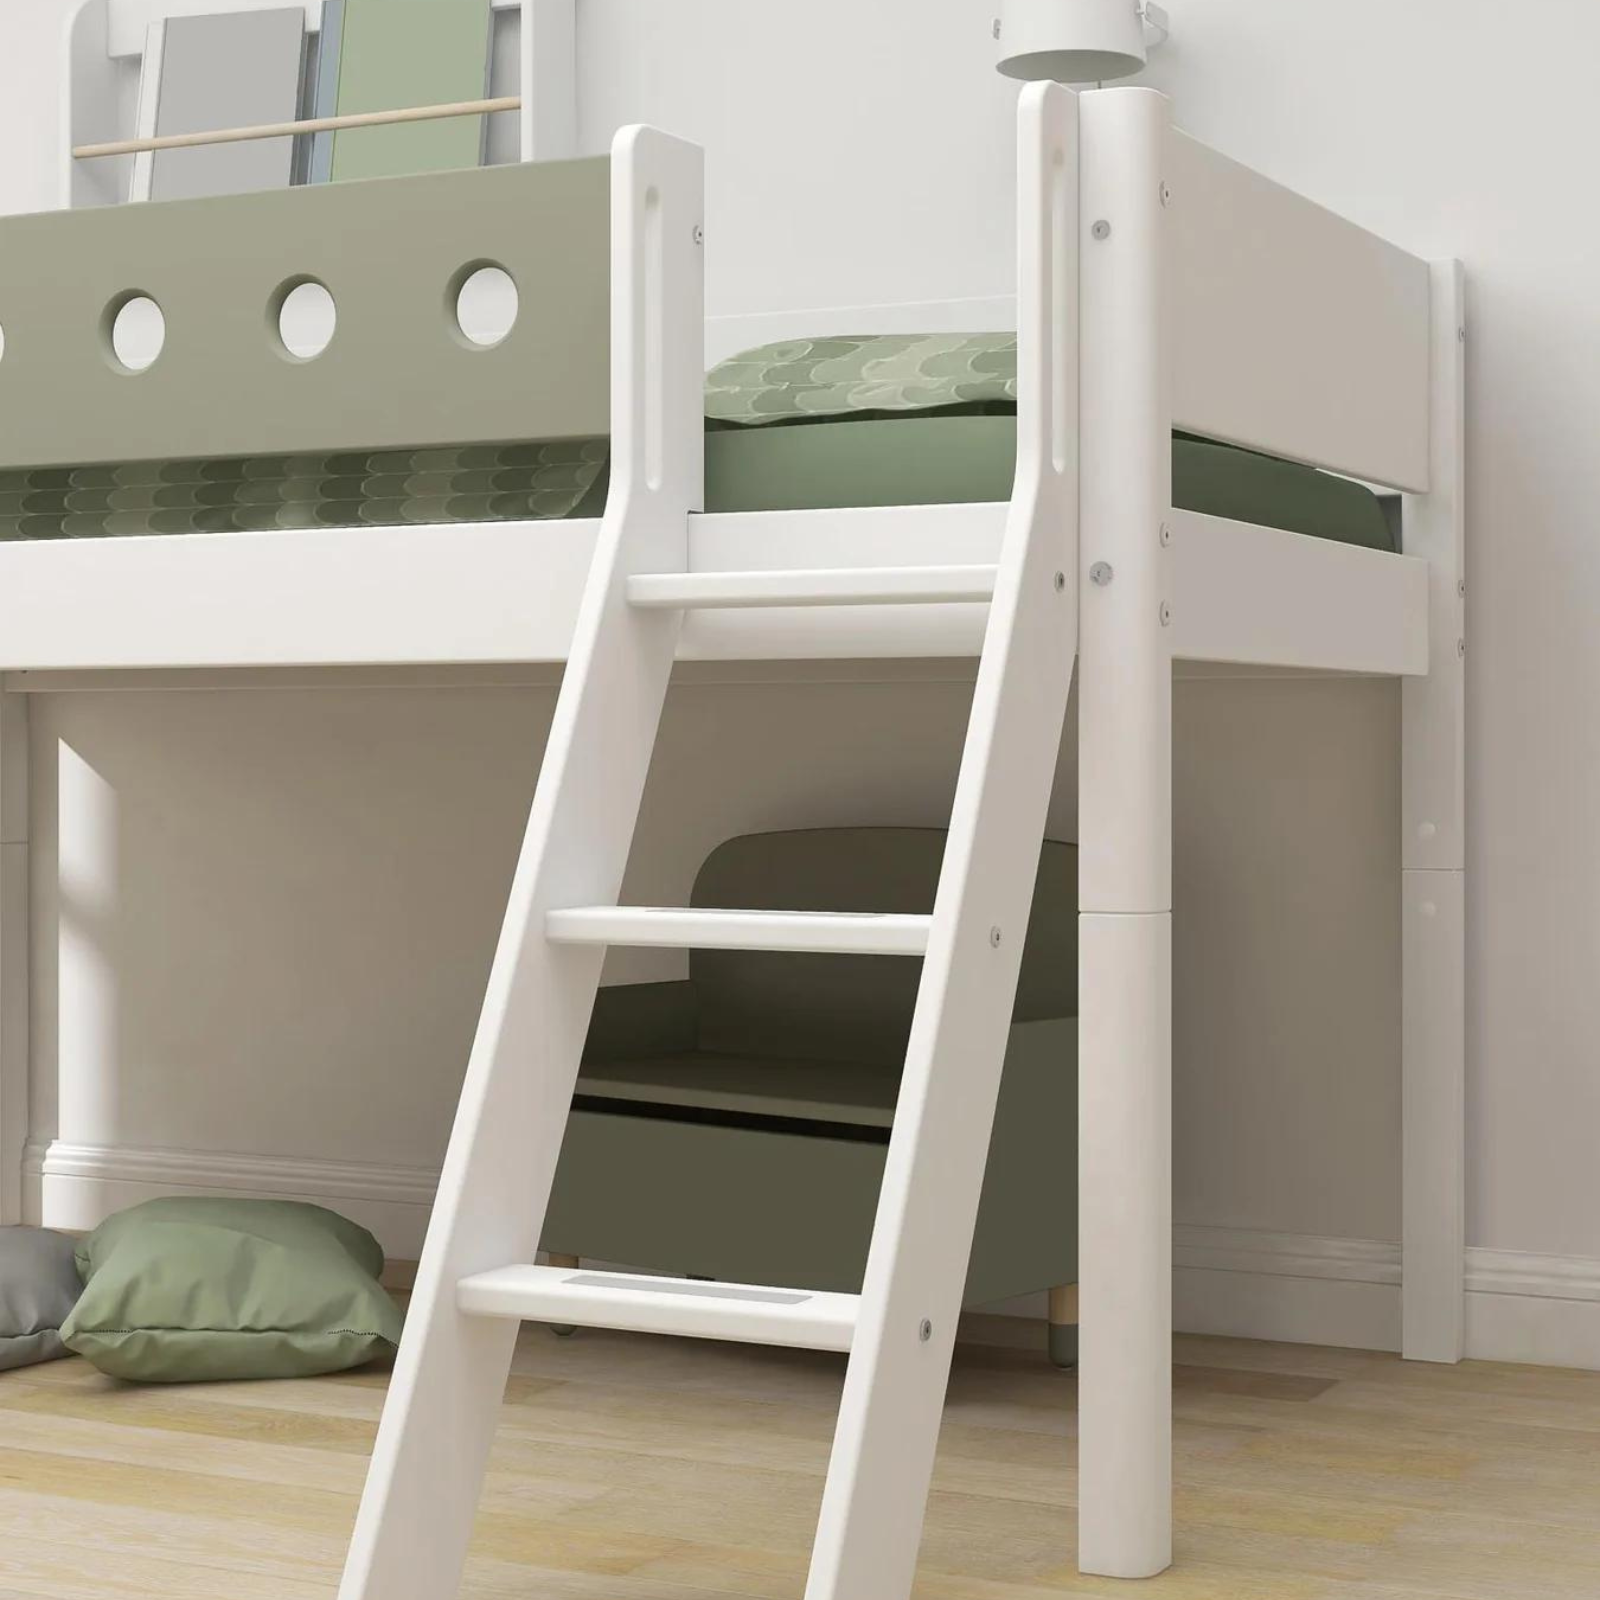 FLEXA Mid-high bed with Slide example 3